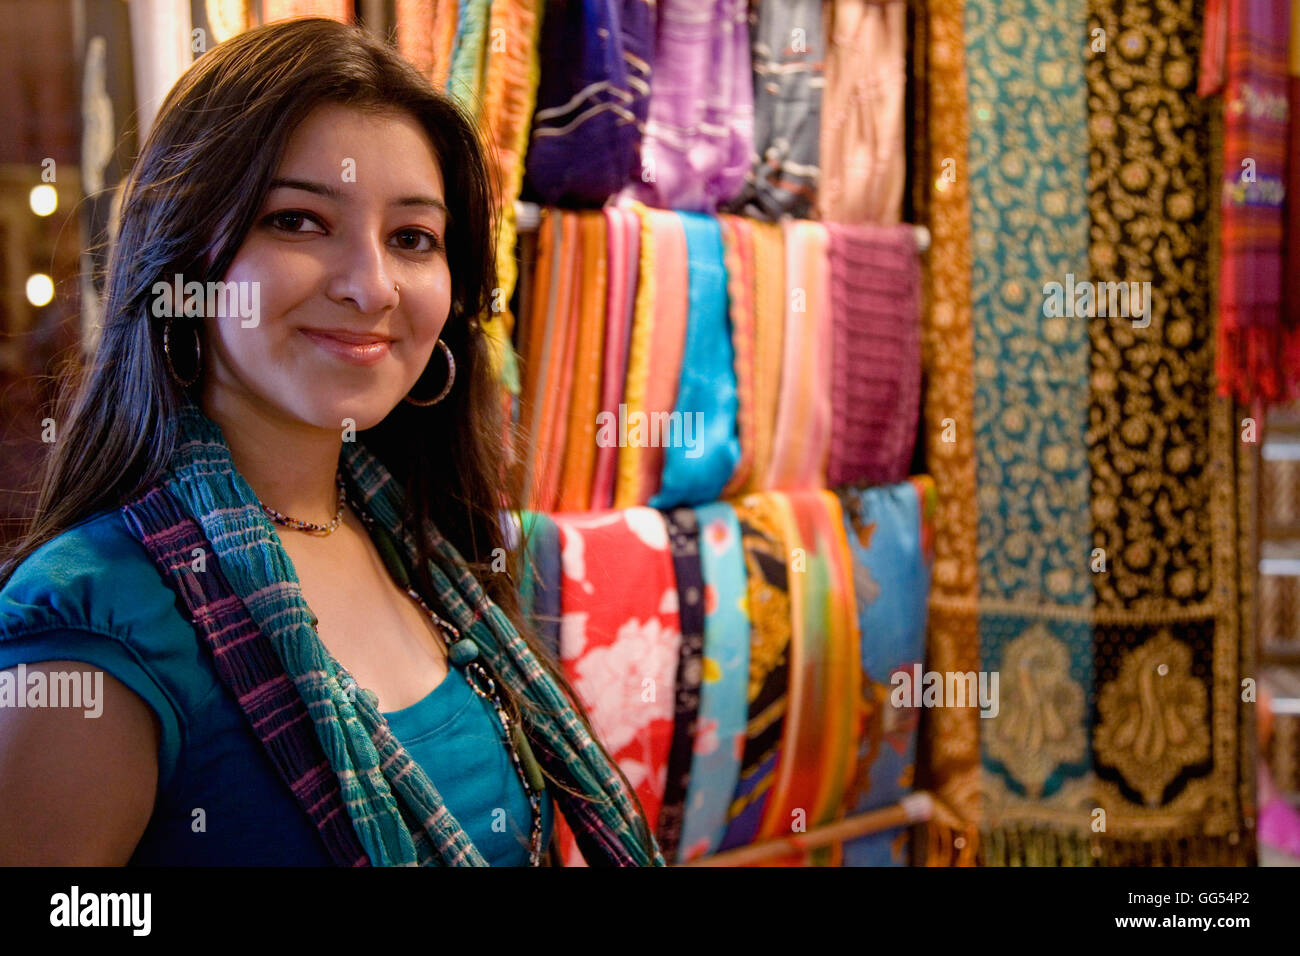 Girl in front of a garment shop Stock Photo